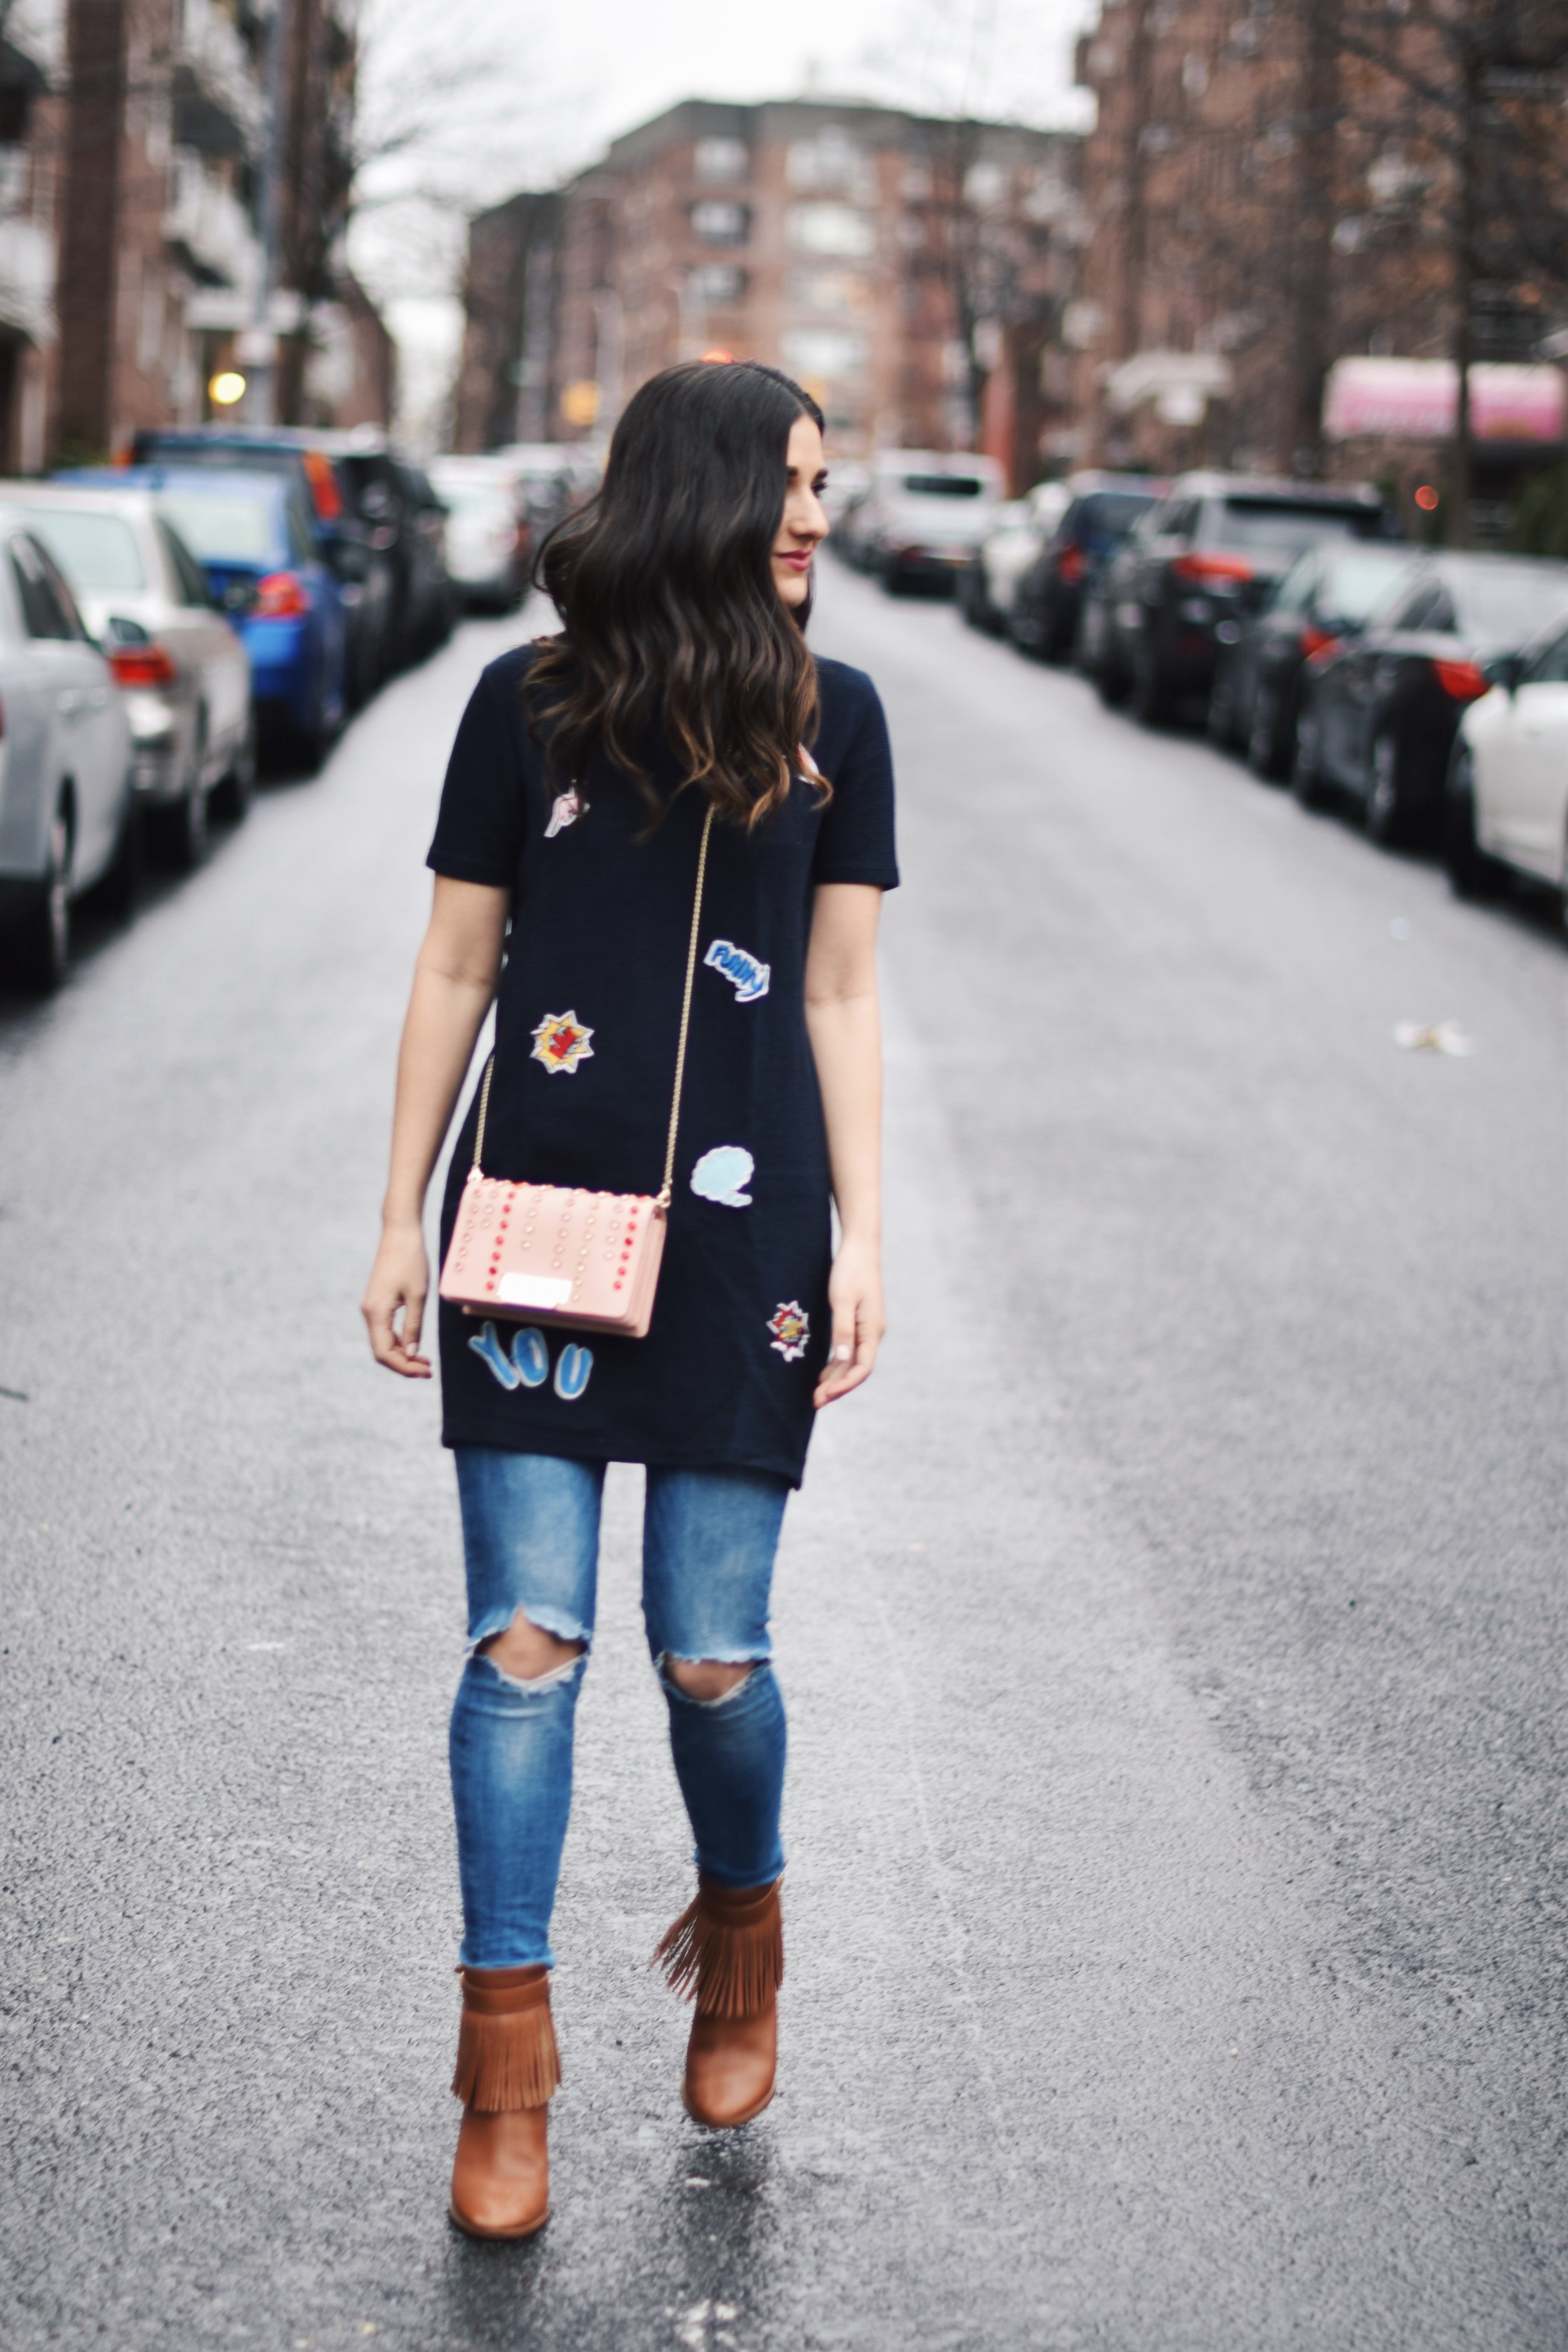 5 Habits You Should Adopt to Become A Better Worker Patch Dress Ripped Jeans Esther Santer Fashion Blog NYC Street Style Blogger Outfit OOTD Trendy Zac Posen Swarovski Bag Sale Online Shopping Zara Buy Jeans Over Dress Styling Nordstrom Fringe Booties.jpg